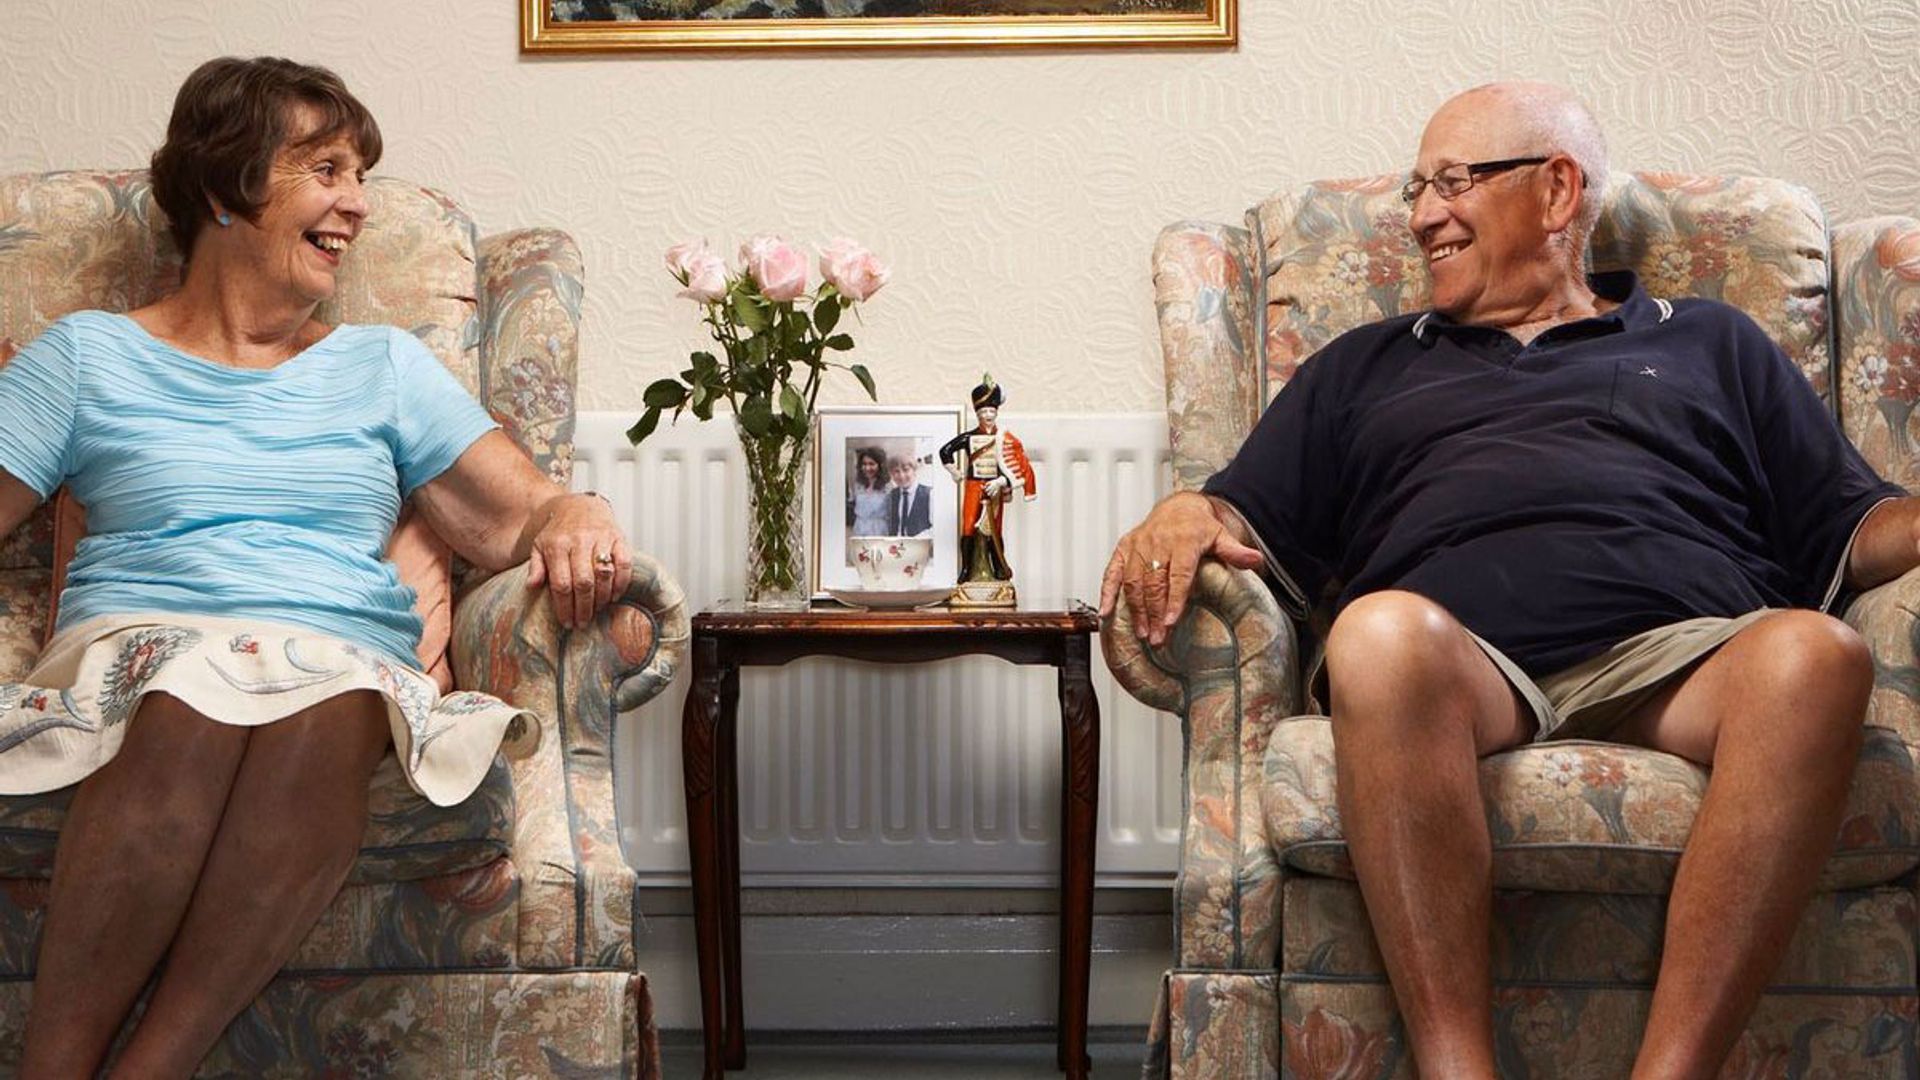 Gogglebox remembering the show's cast members who have sadly passed